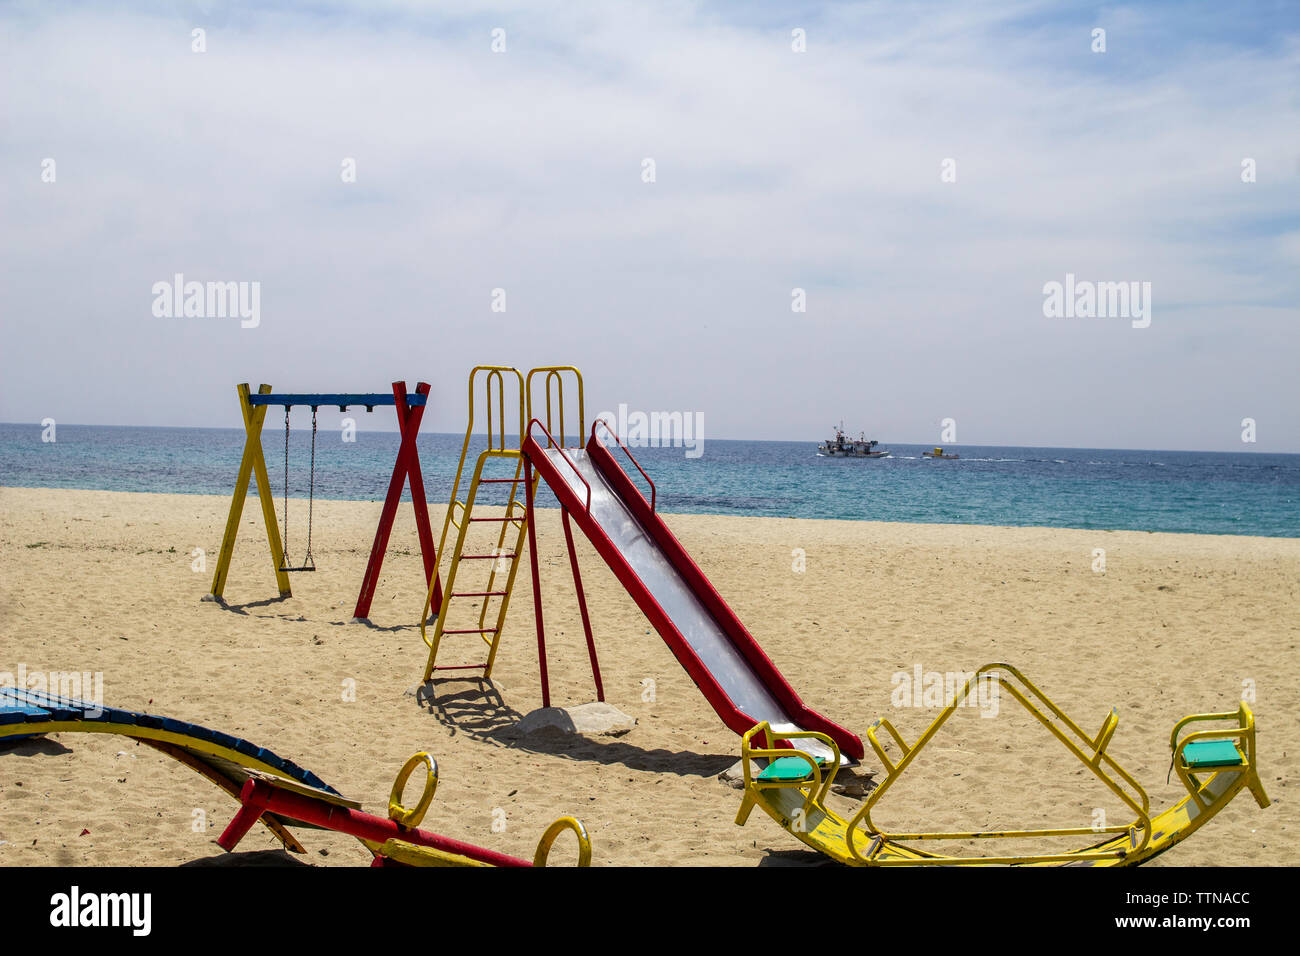 Childrens Playground situated on the beach at Nea Skioni,Halkidiki , Greece with a fishing trawler in the background. Stock Photo